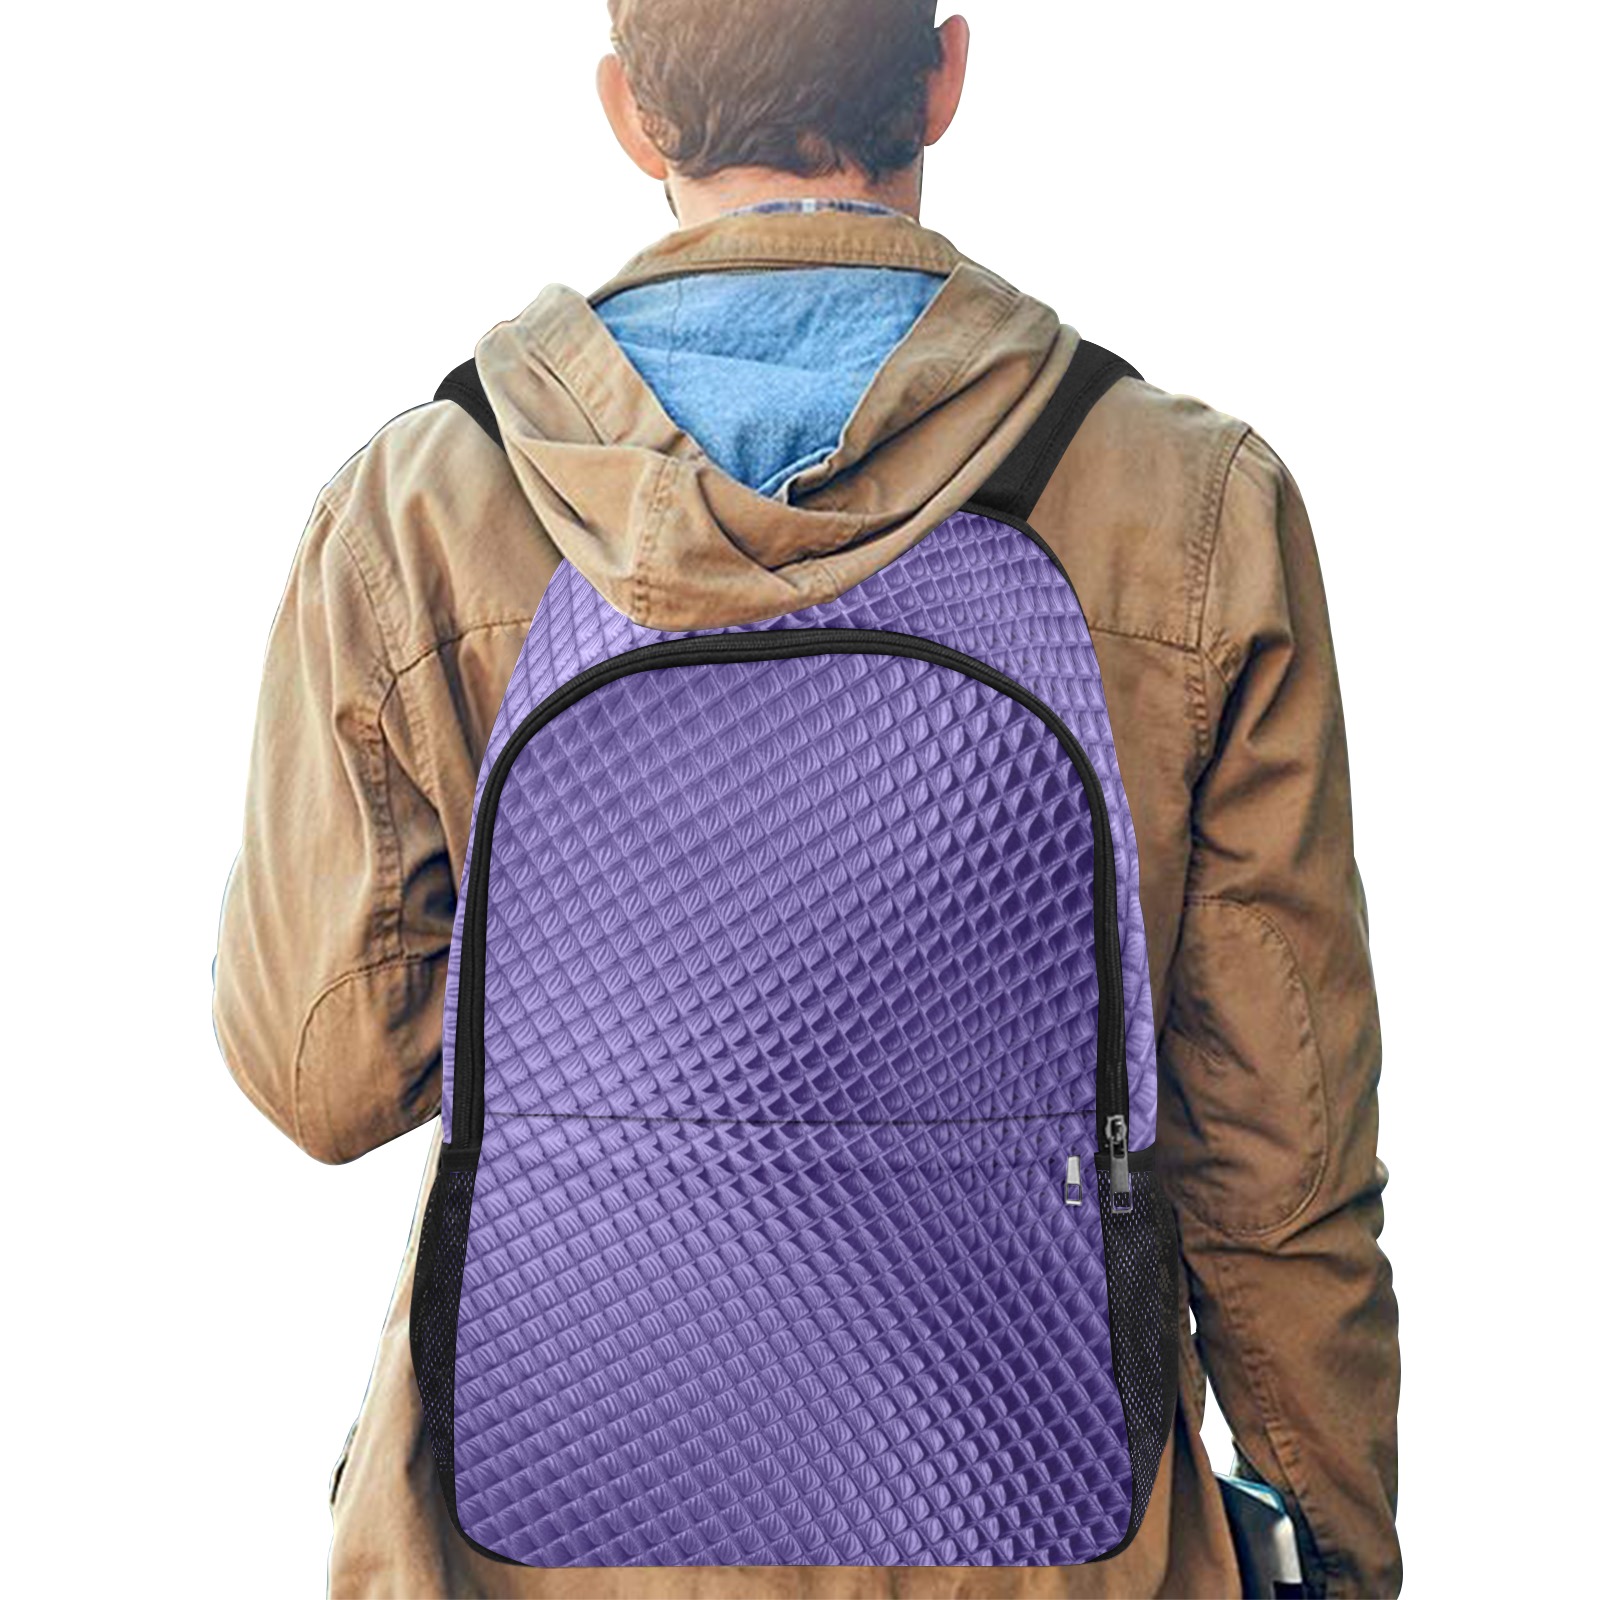 Very peri by Artdream Fabric Backpack with Side Mesh Pockets (Model 1659)